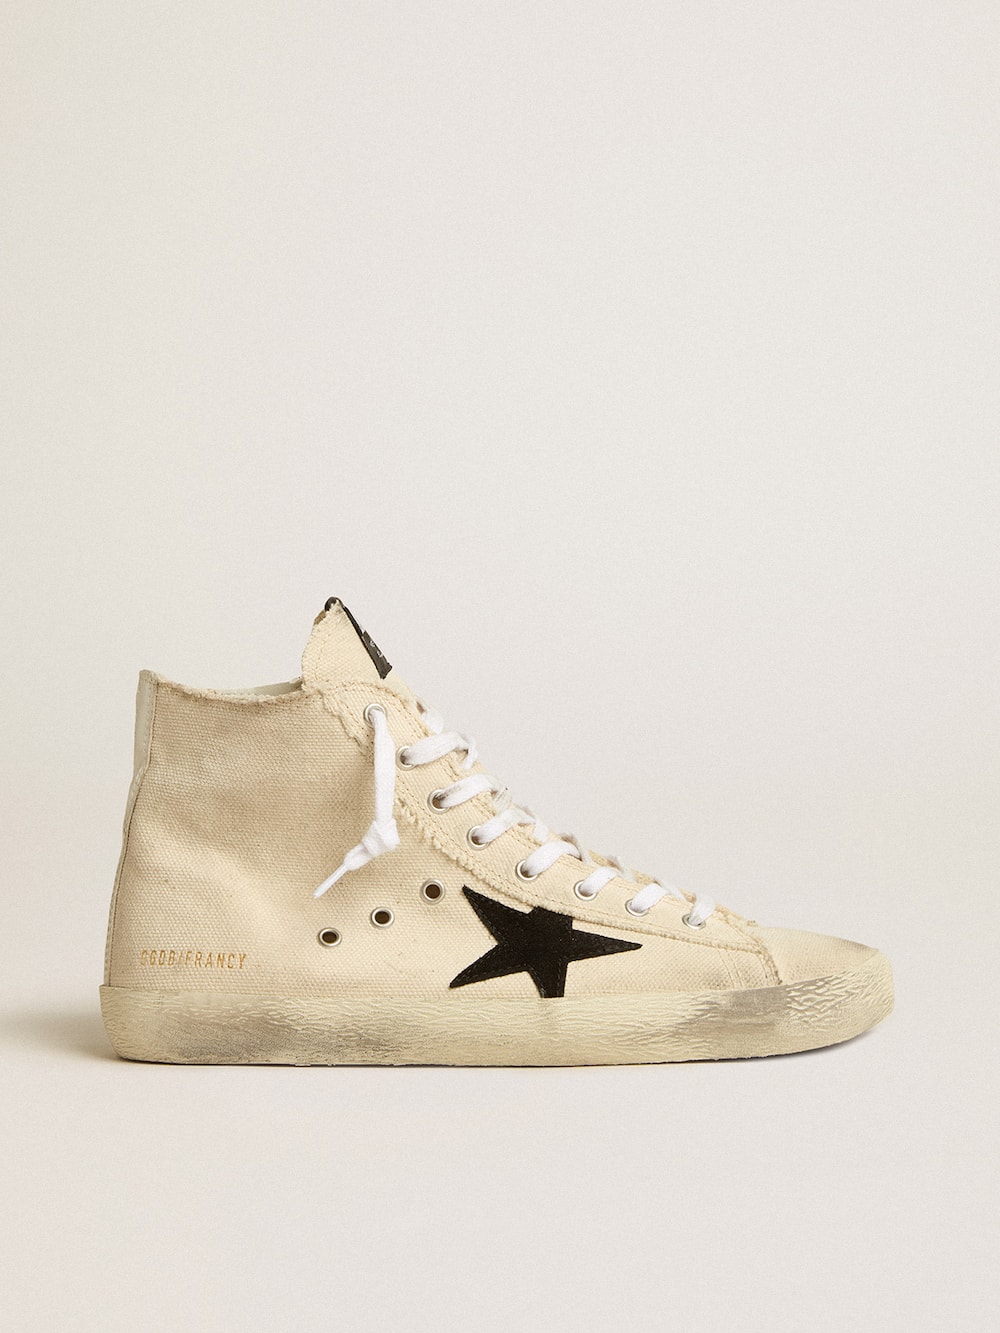 Golden Goose - Francy Penstar in canvas with black suede star and leather heel tab in 